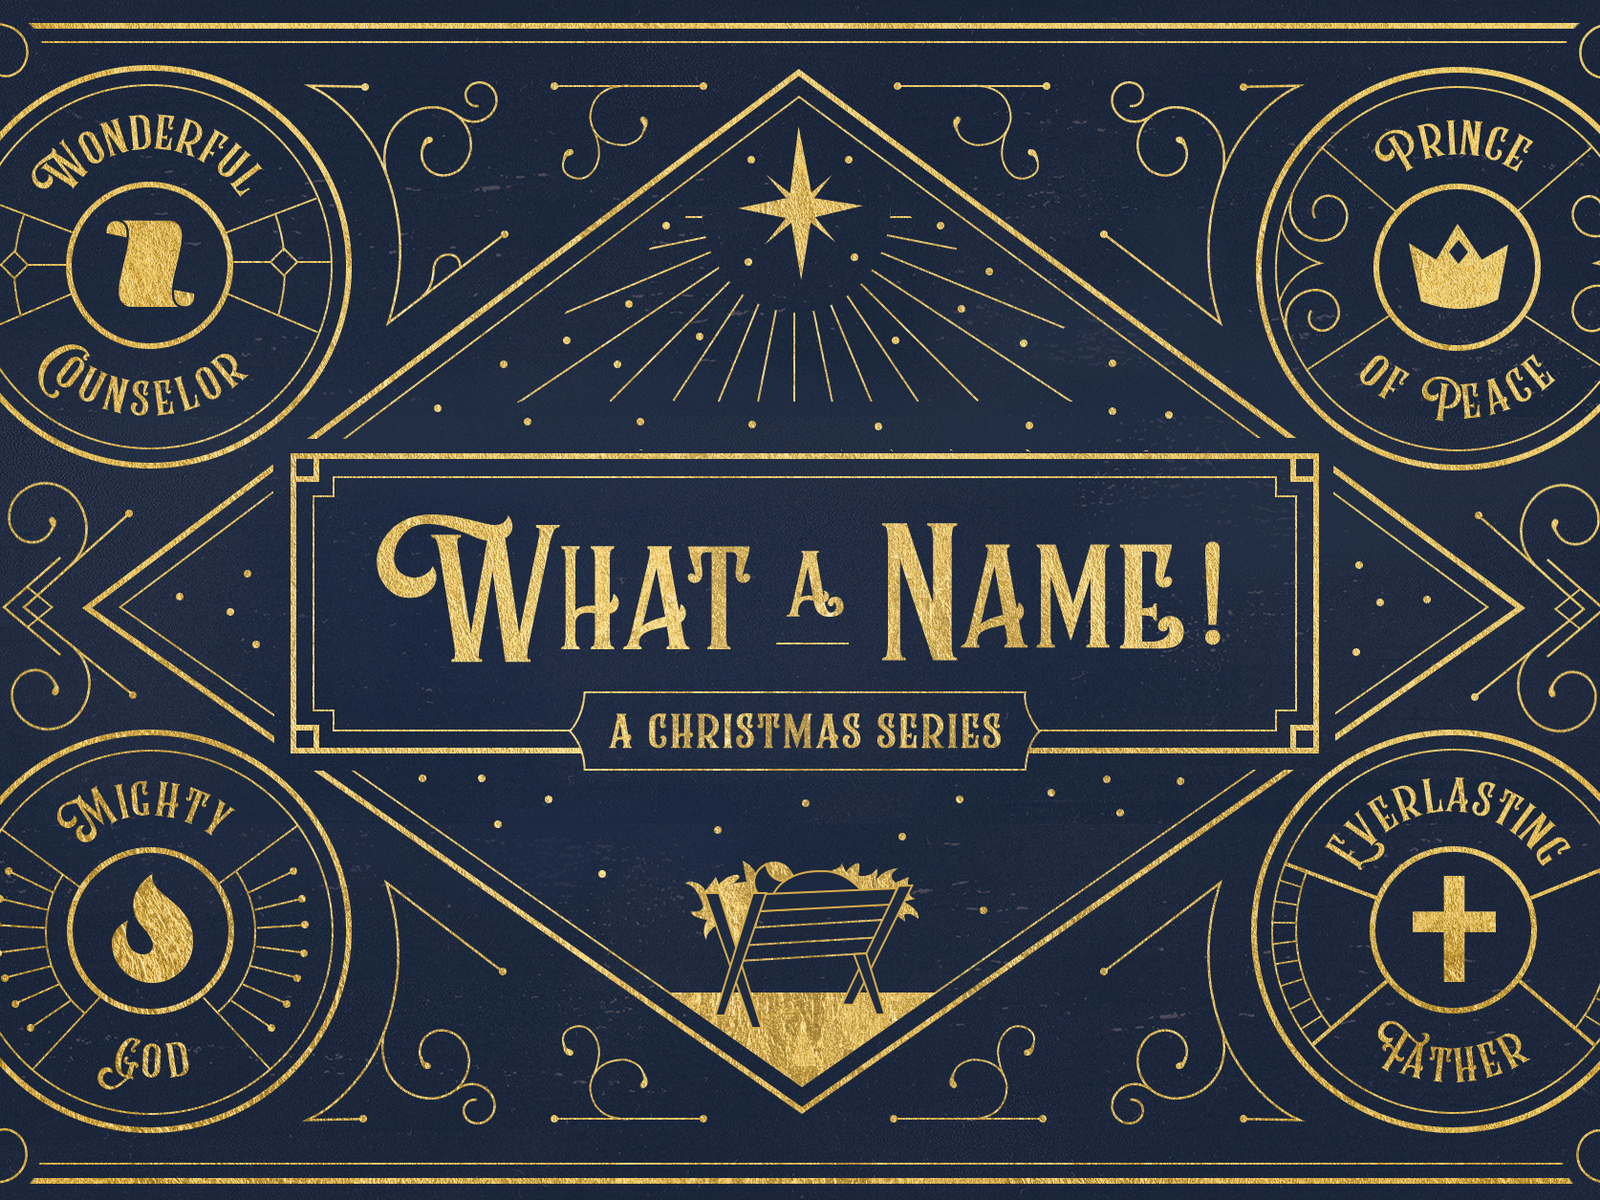 Christmas Sermon Series by Amy Crowder on Dribbble